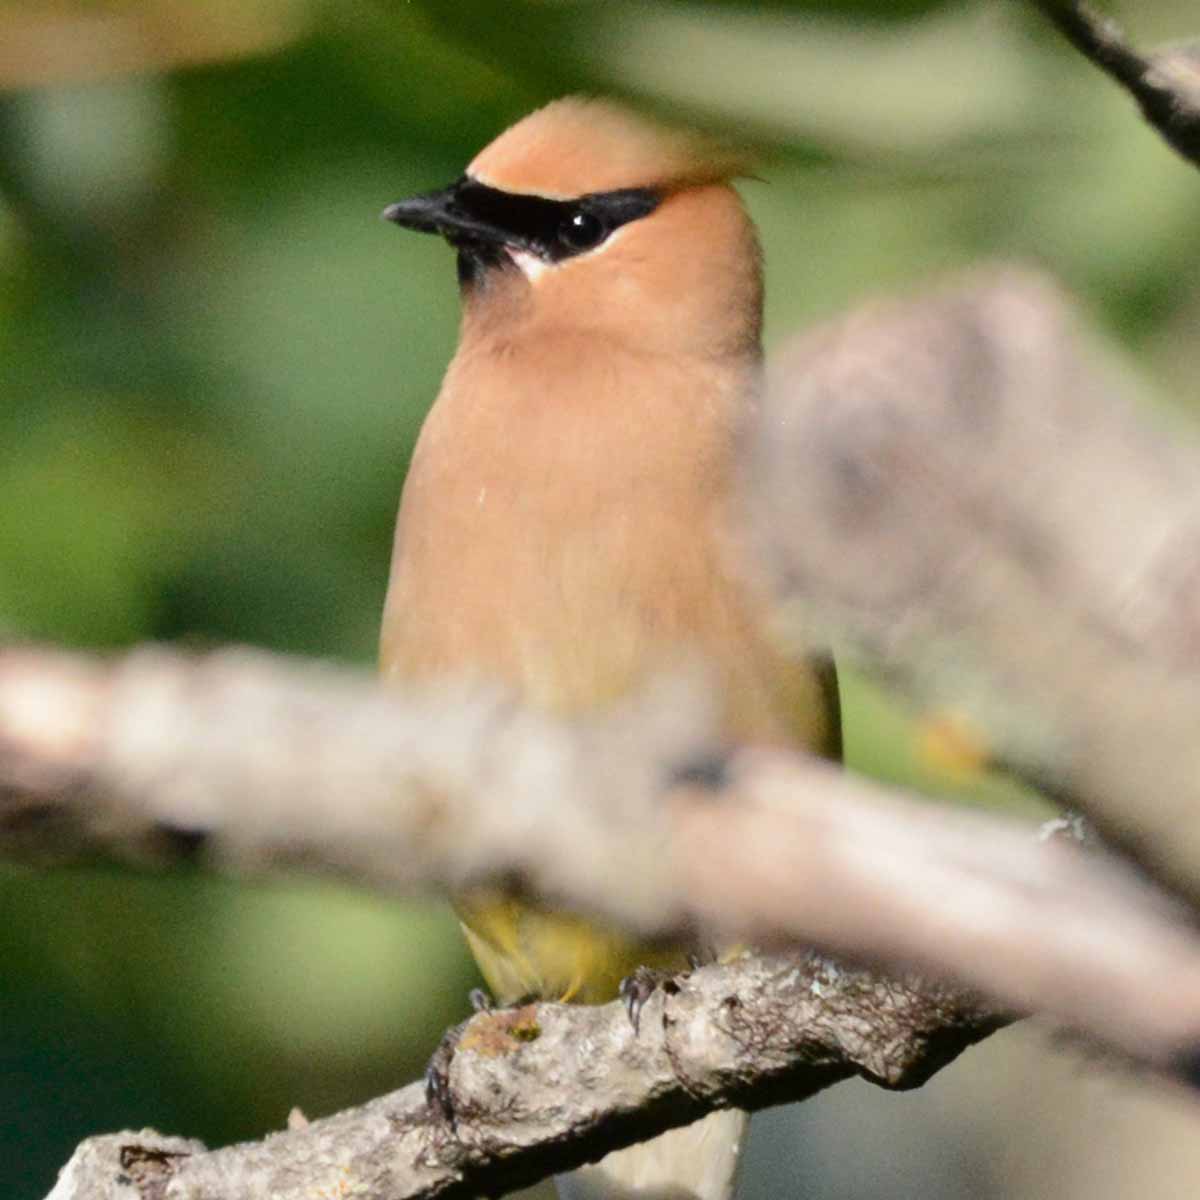 The cedar waxwing is a medium-sized, sleek songbird with a large head, short neck, and short, wide bill. It has a distinctive crest that often lies flat and droops over the back of its head. The wings are broad and pointed, and the tail is fairly short and square-tipped. 
The cedar waxwing has a black mask around its eyes, a tan head and breast, a yellow belly, and grayish-brown upperparts. The tail has a yellow band at the tip, and some of the wing feathers have waxy red tips that give the bird its name. 
Juveniles are more heavily marked than adults, with dusky streaks below and a fainter dark mask. Some birds may also be less intensely colored and lack the red feather tips in the wings. 
Cedar waxwings are known for their acrobatic foraging, often perching at the tips of thin branches to feed on berries and other fruits. They frequently gather in large flocks, especially during the fall and winter months when they can be seen devouring fruit wherever they can find it.